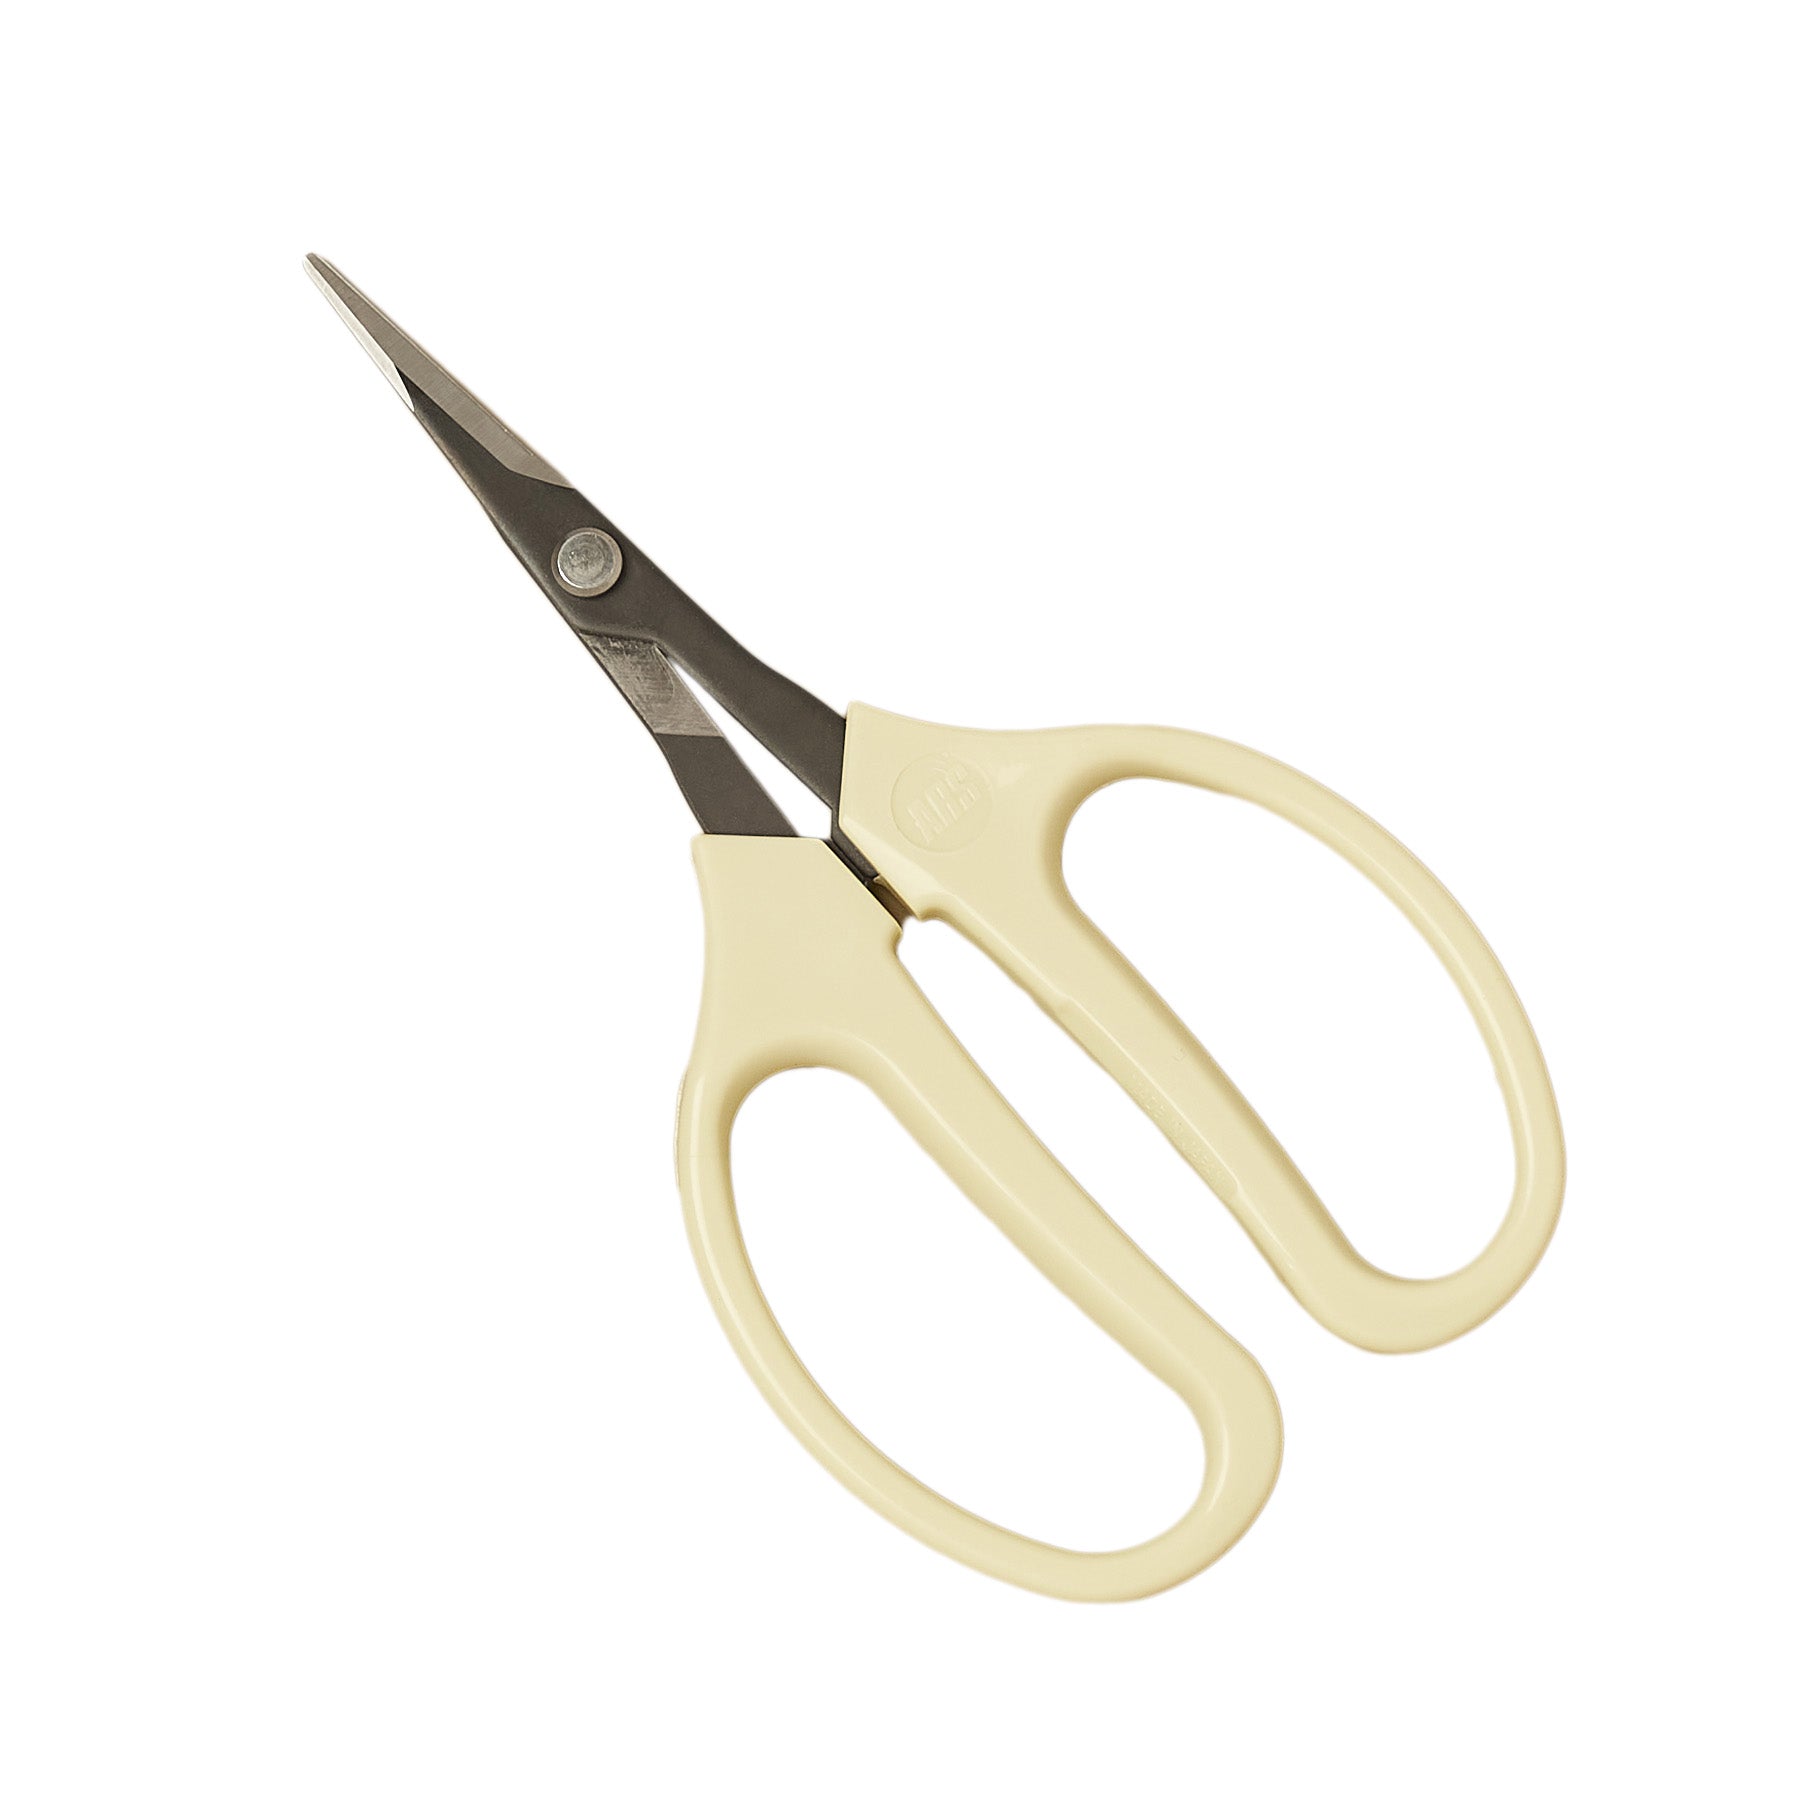 A pair of scissors on a white background at the best garden nursery near me.